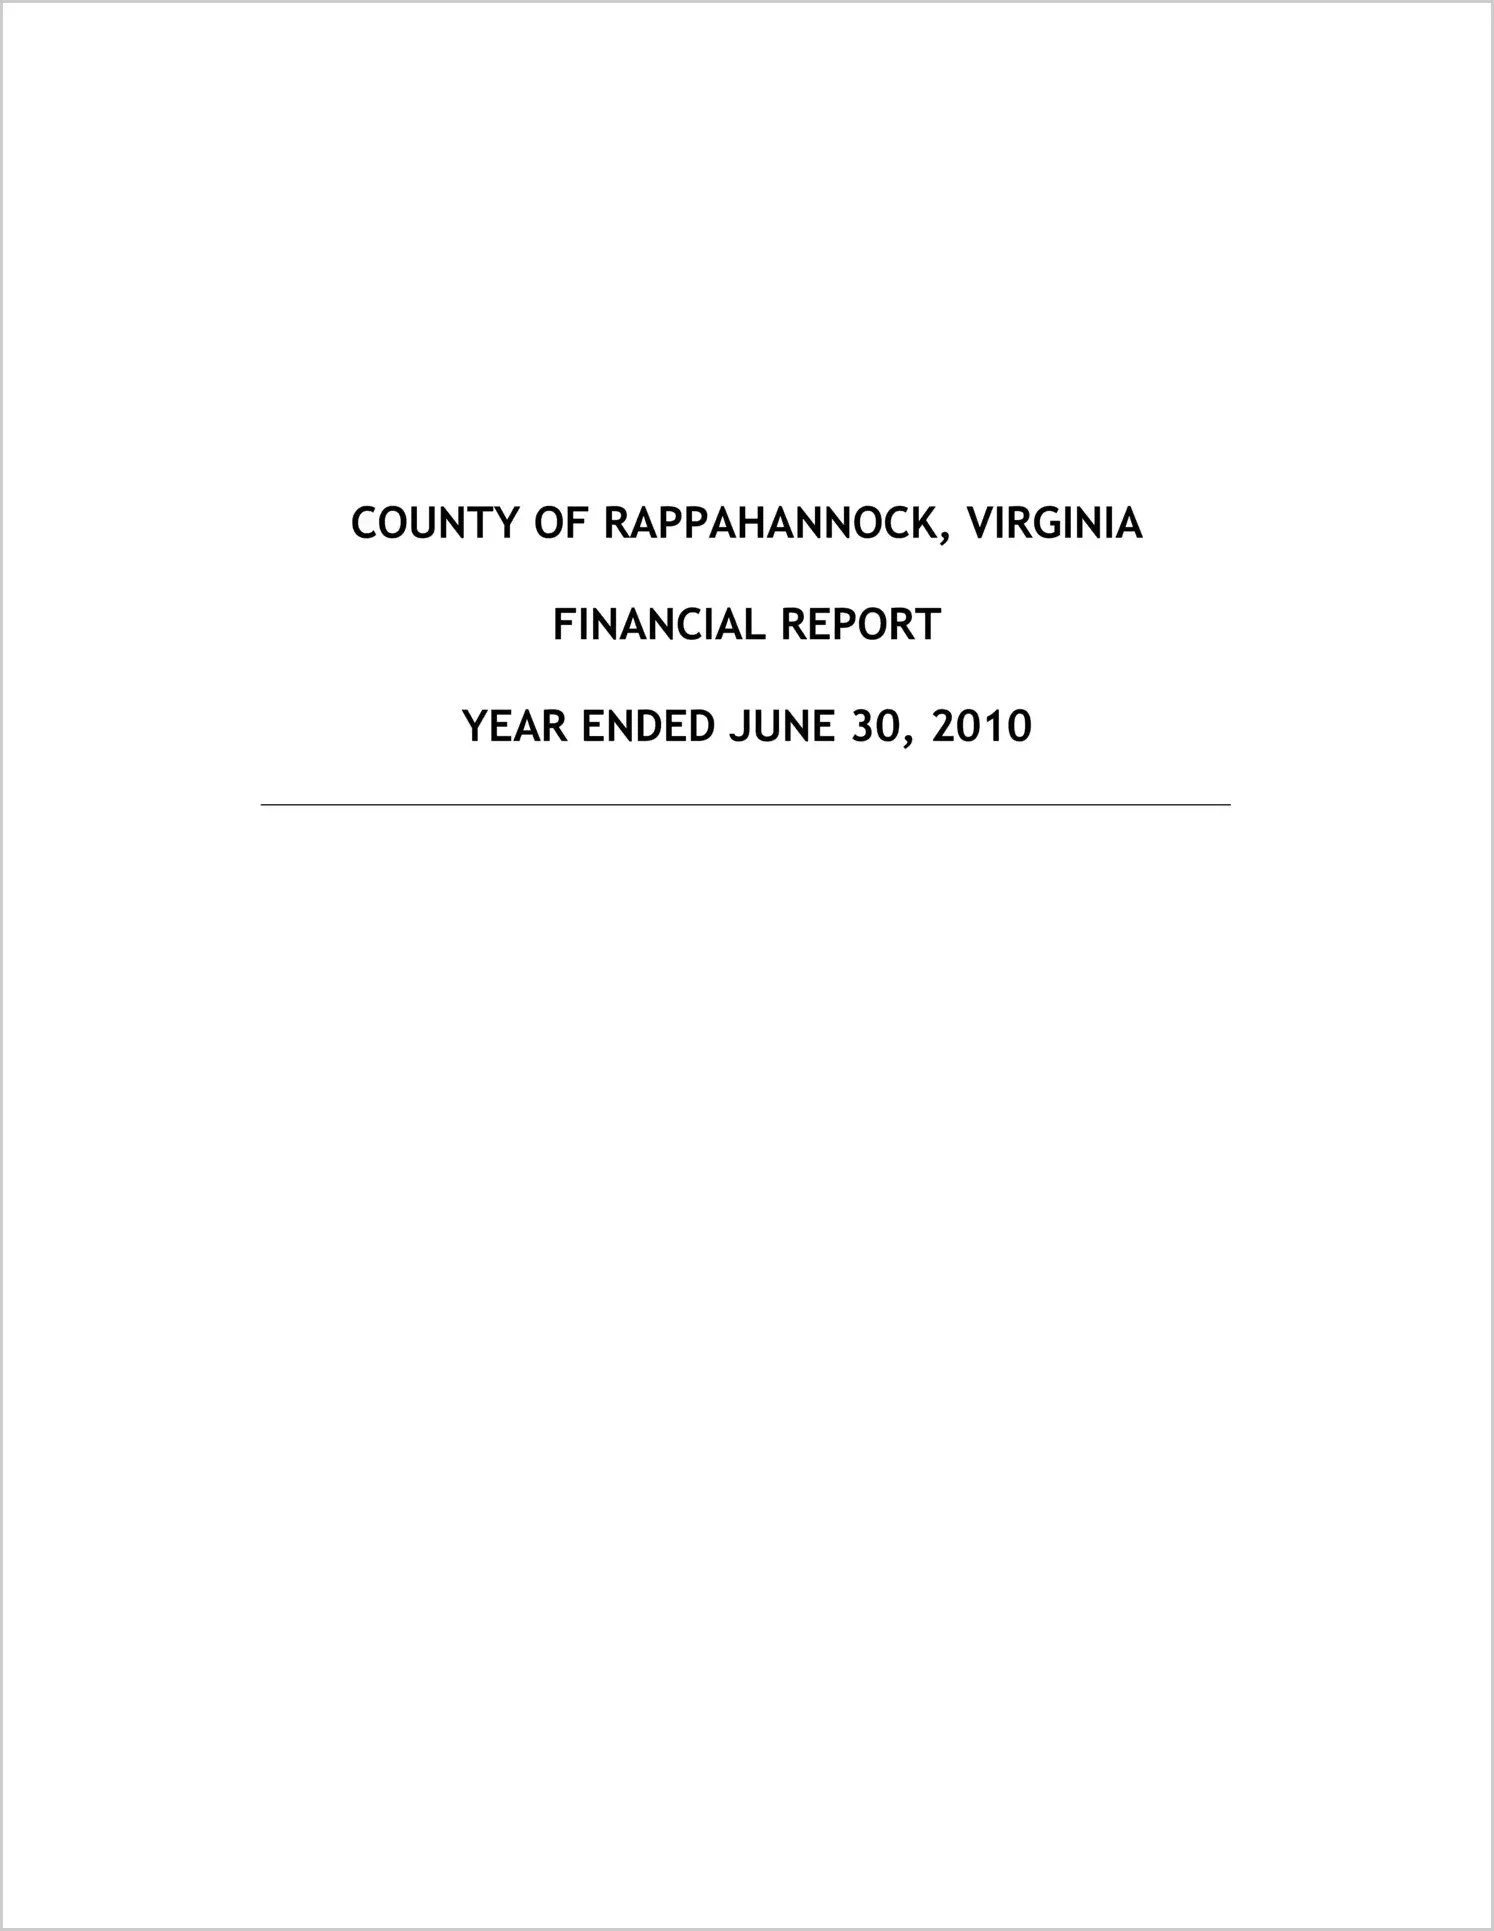 2010 Annual Financial Report for County of Rappahannock